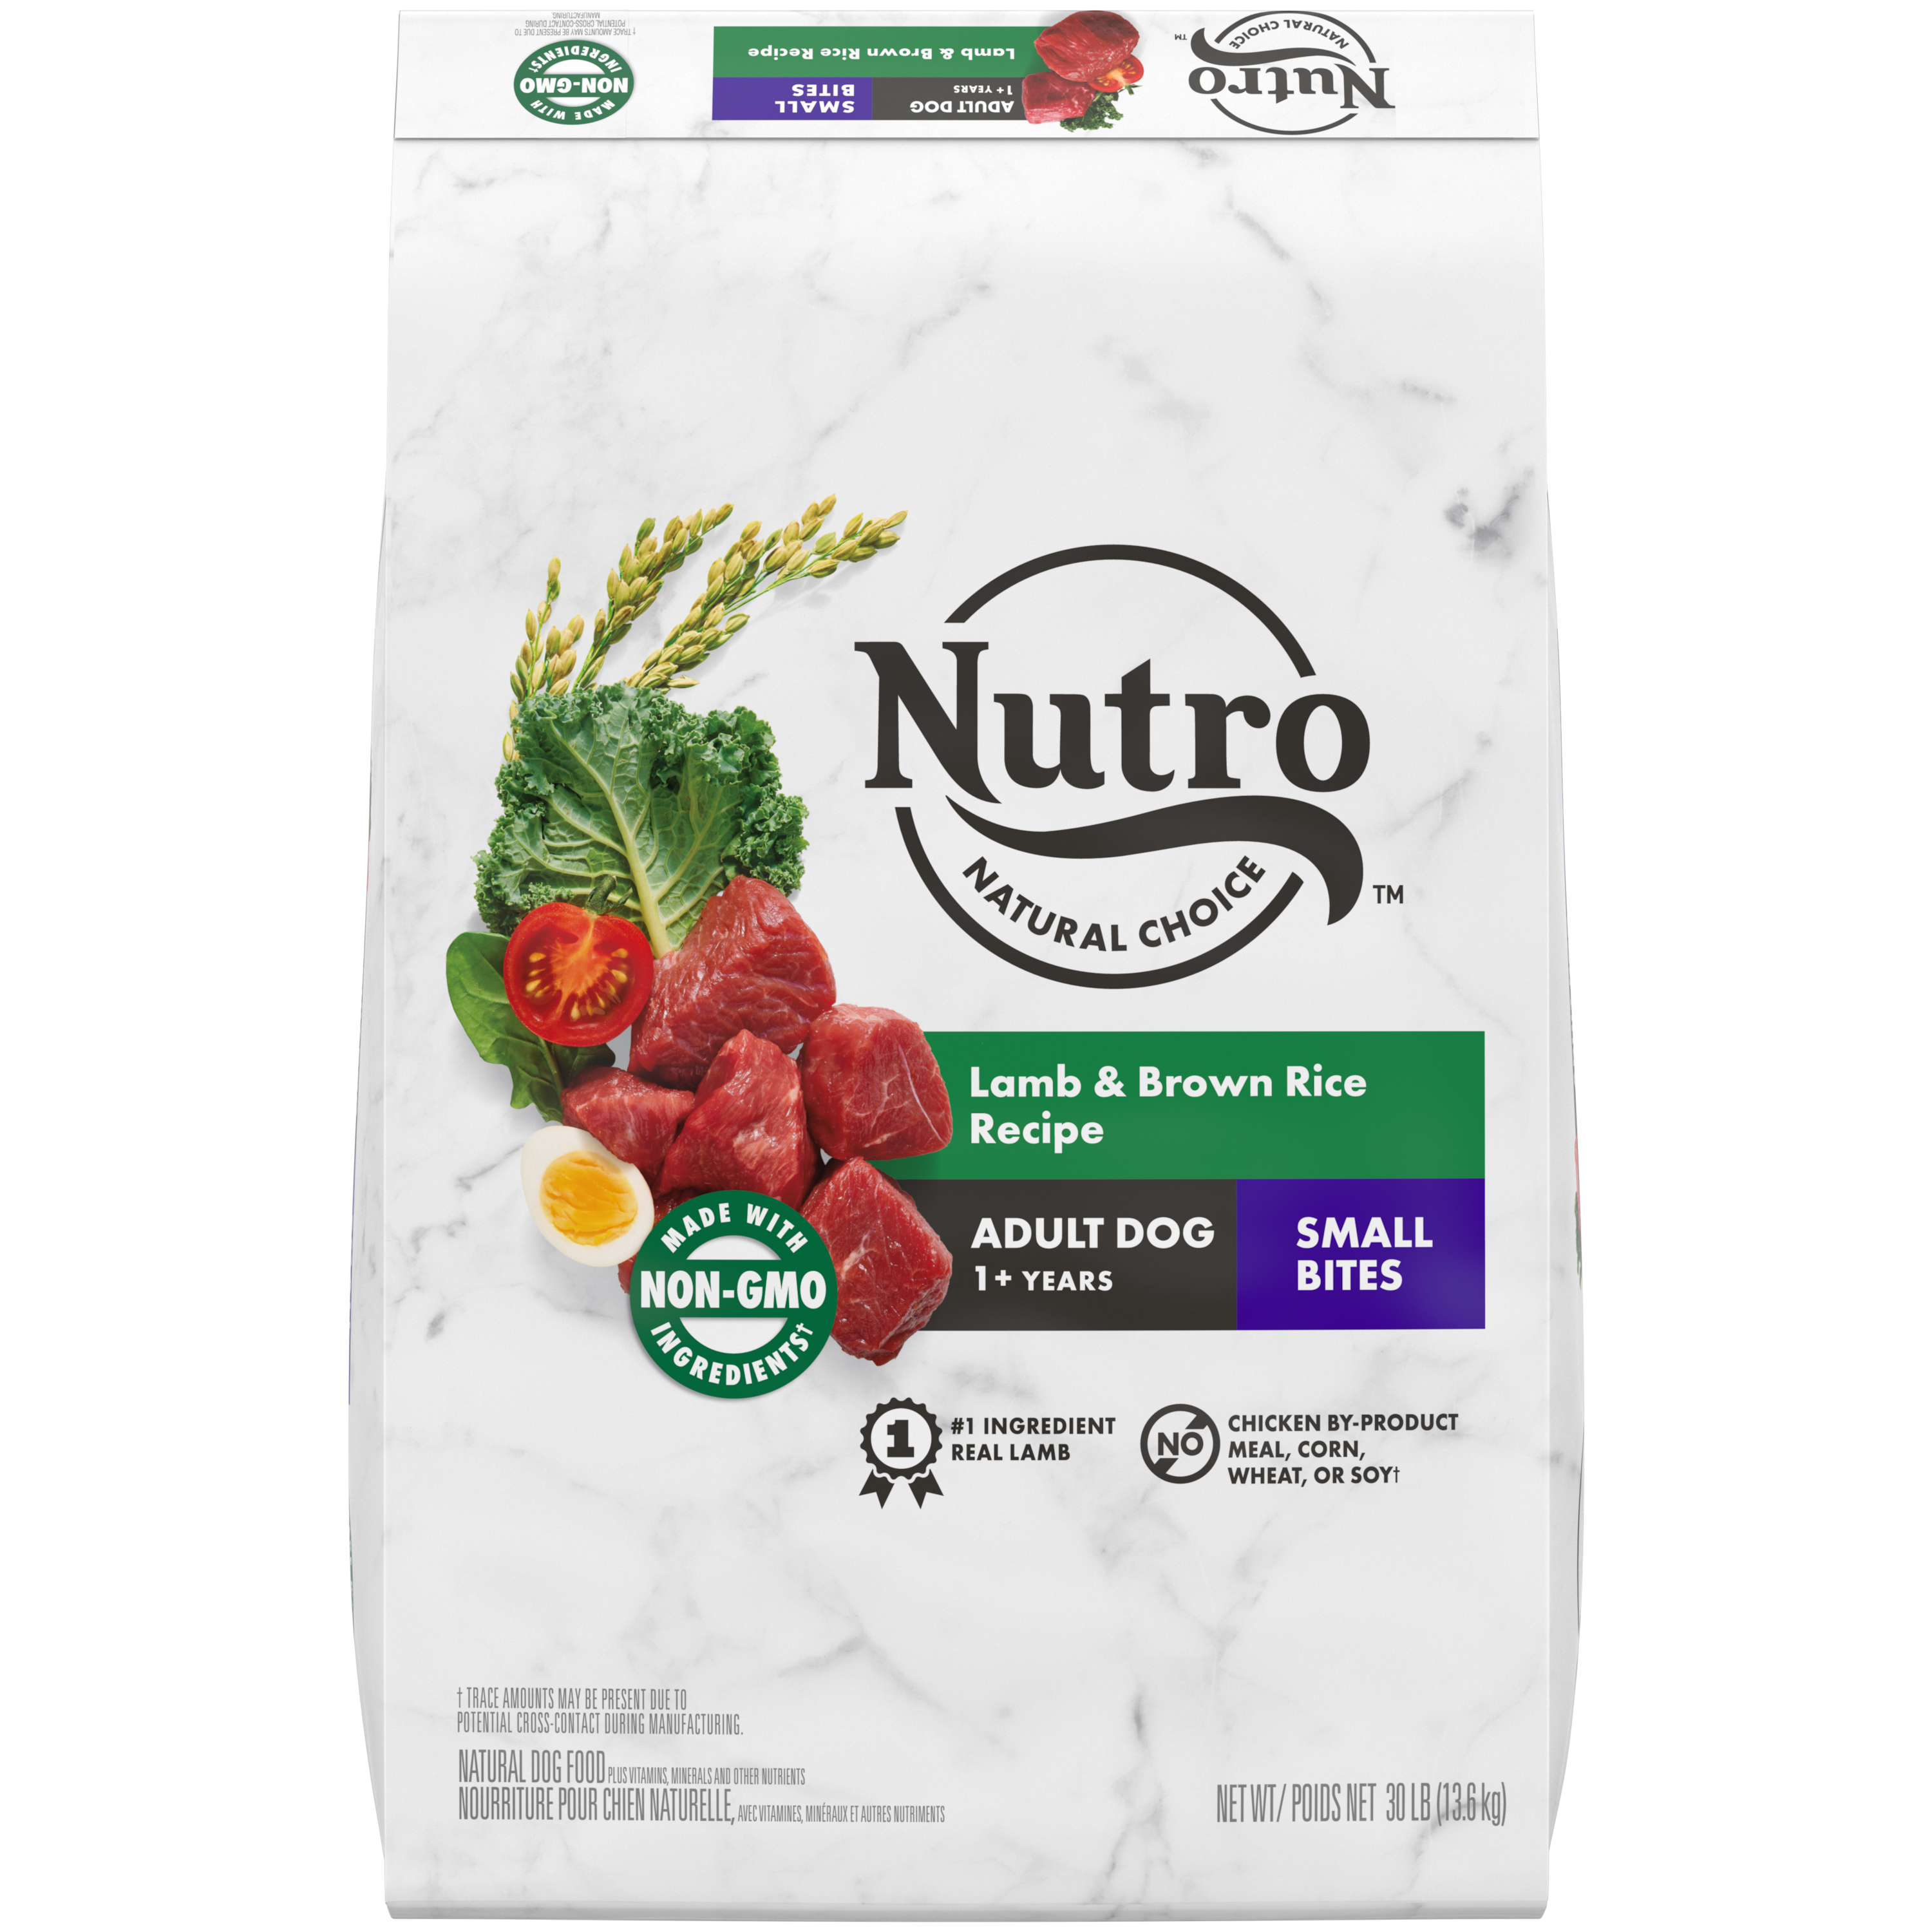 Nutro Natural Choice Small Bites Lamb & Brown Rice Dry Dog Food for Adult Dogs, 30 lb. Bag - image 1 of 13